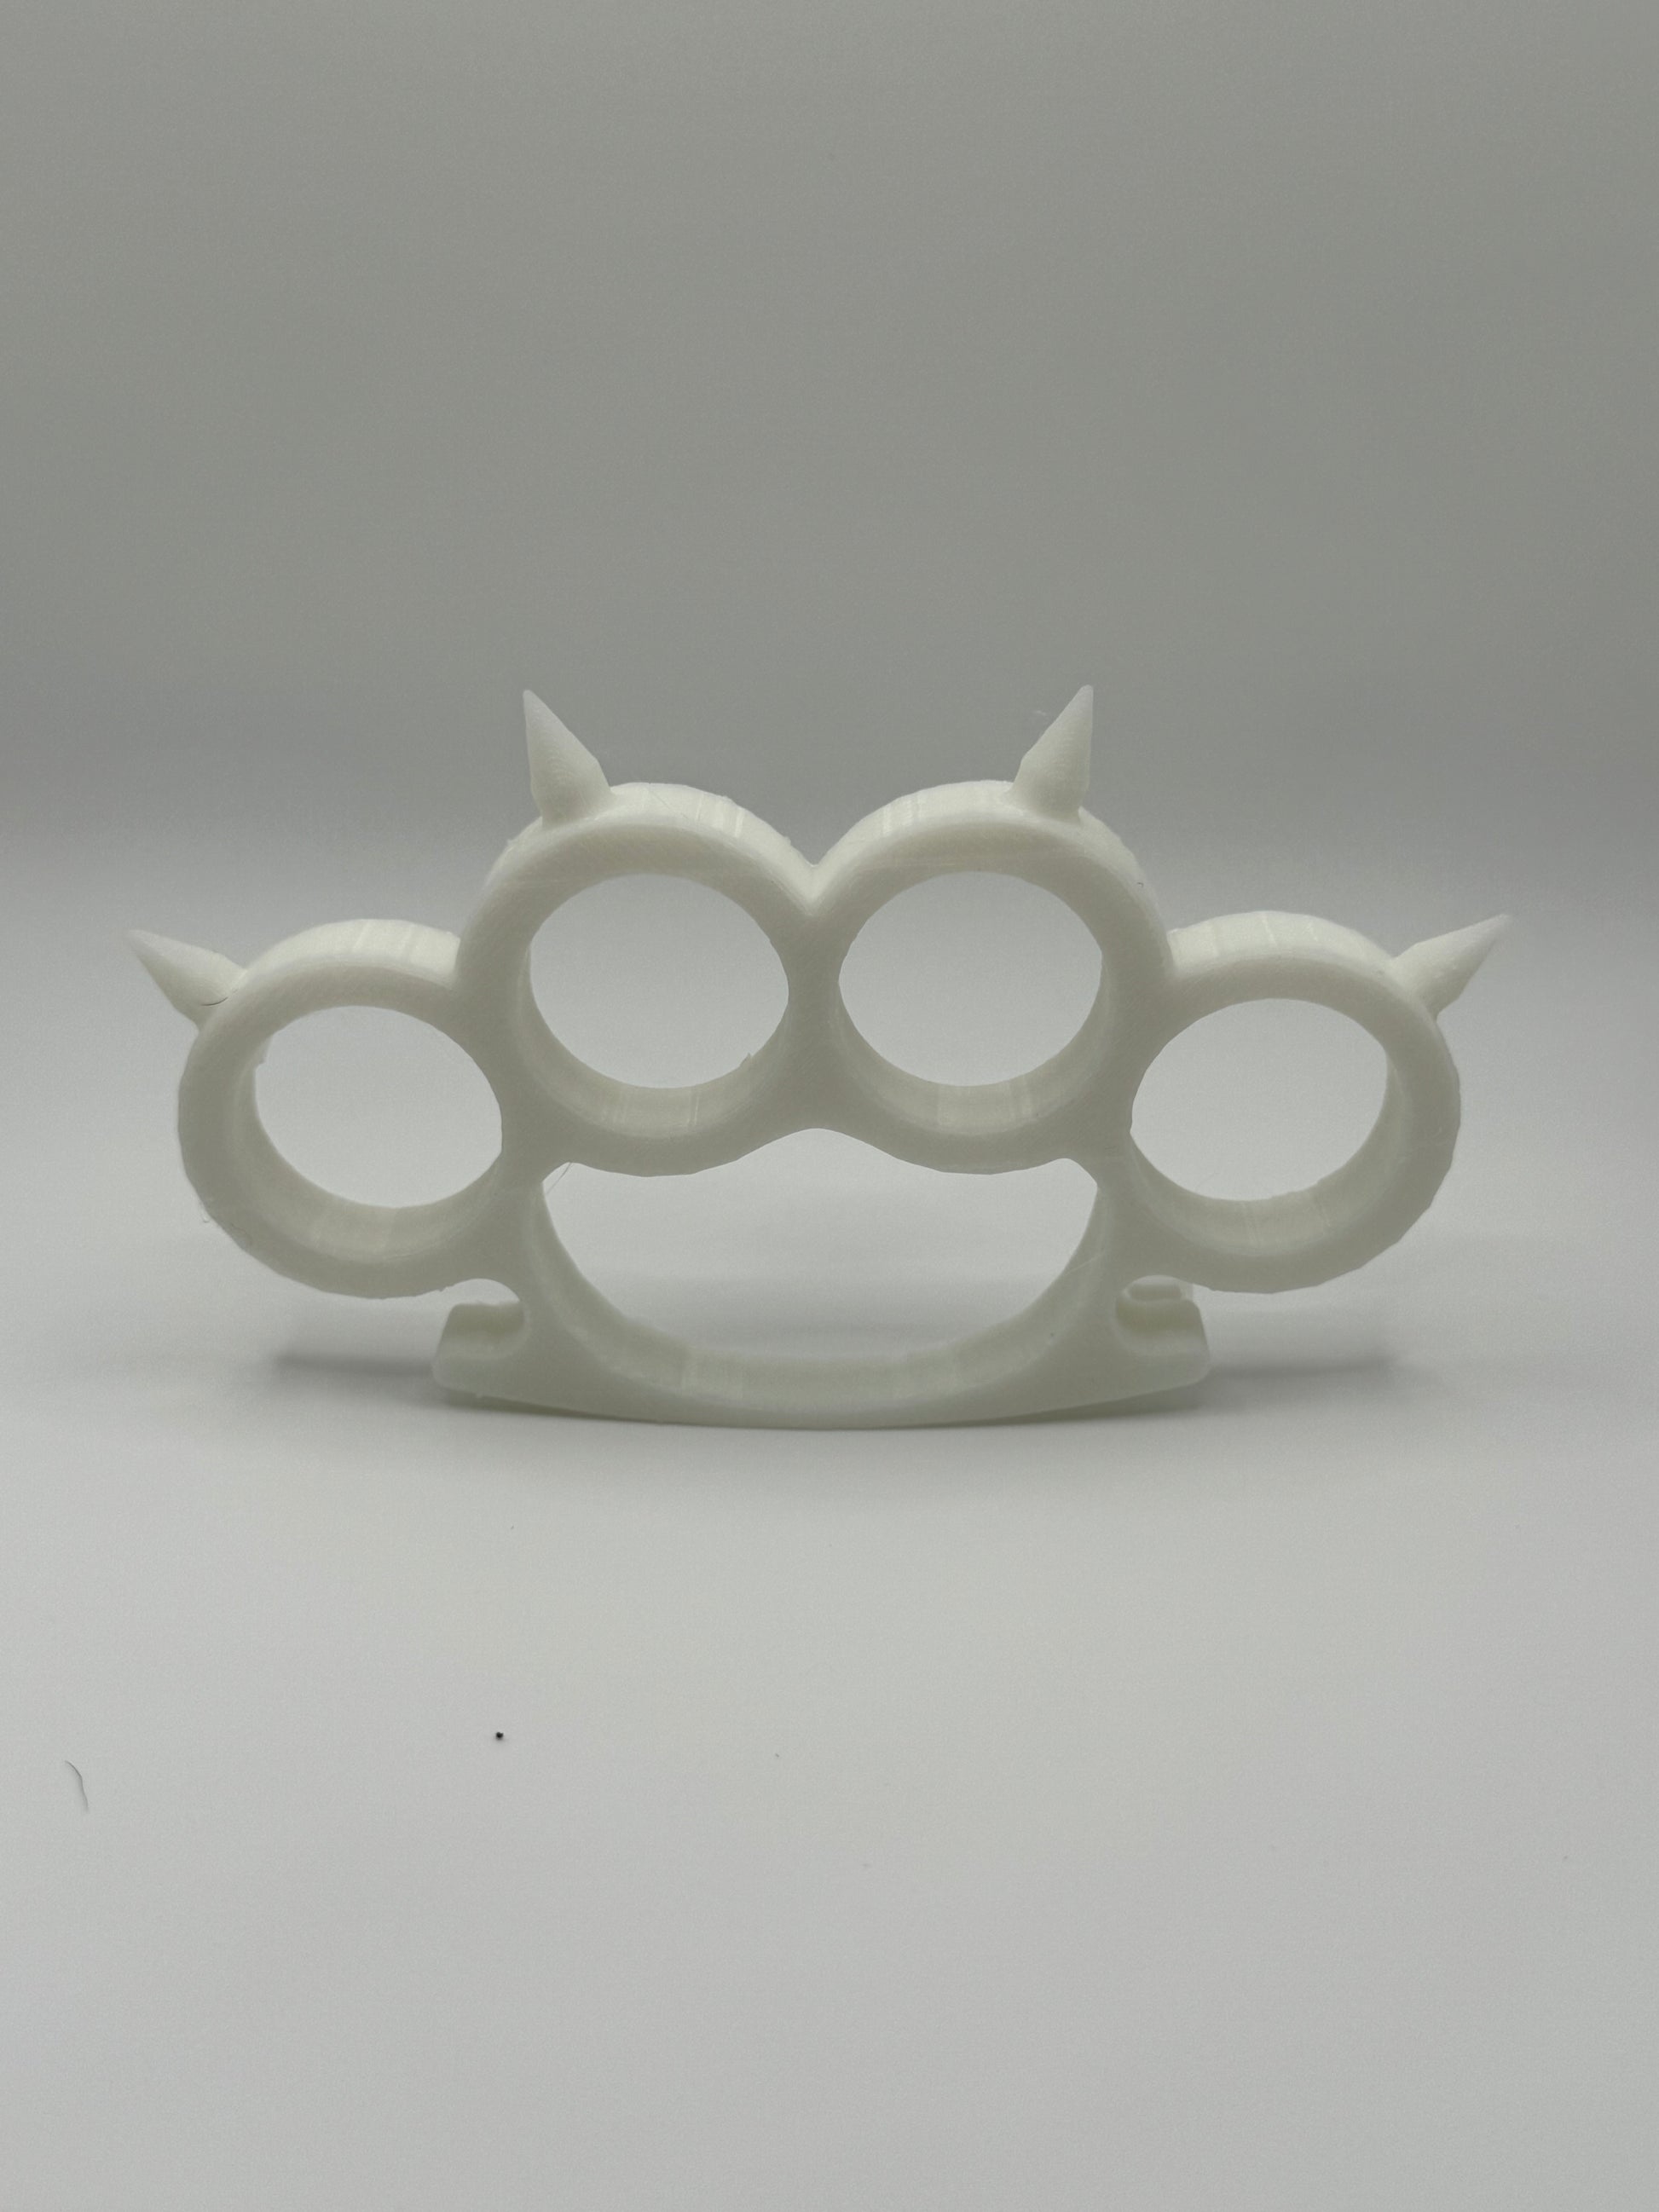 Spiked Knuckles Version 2.0 In White